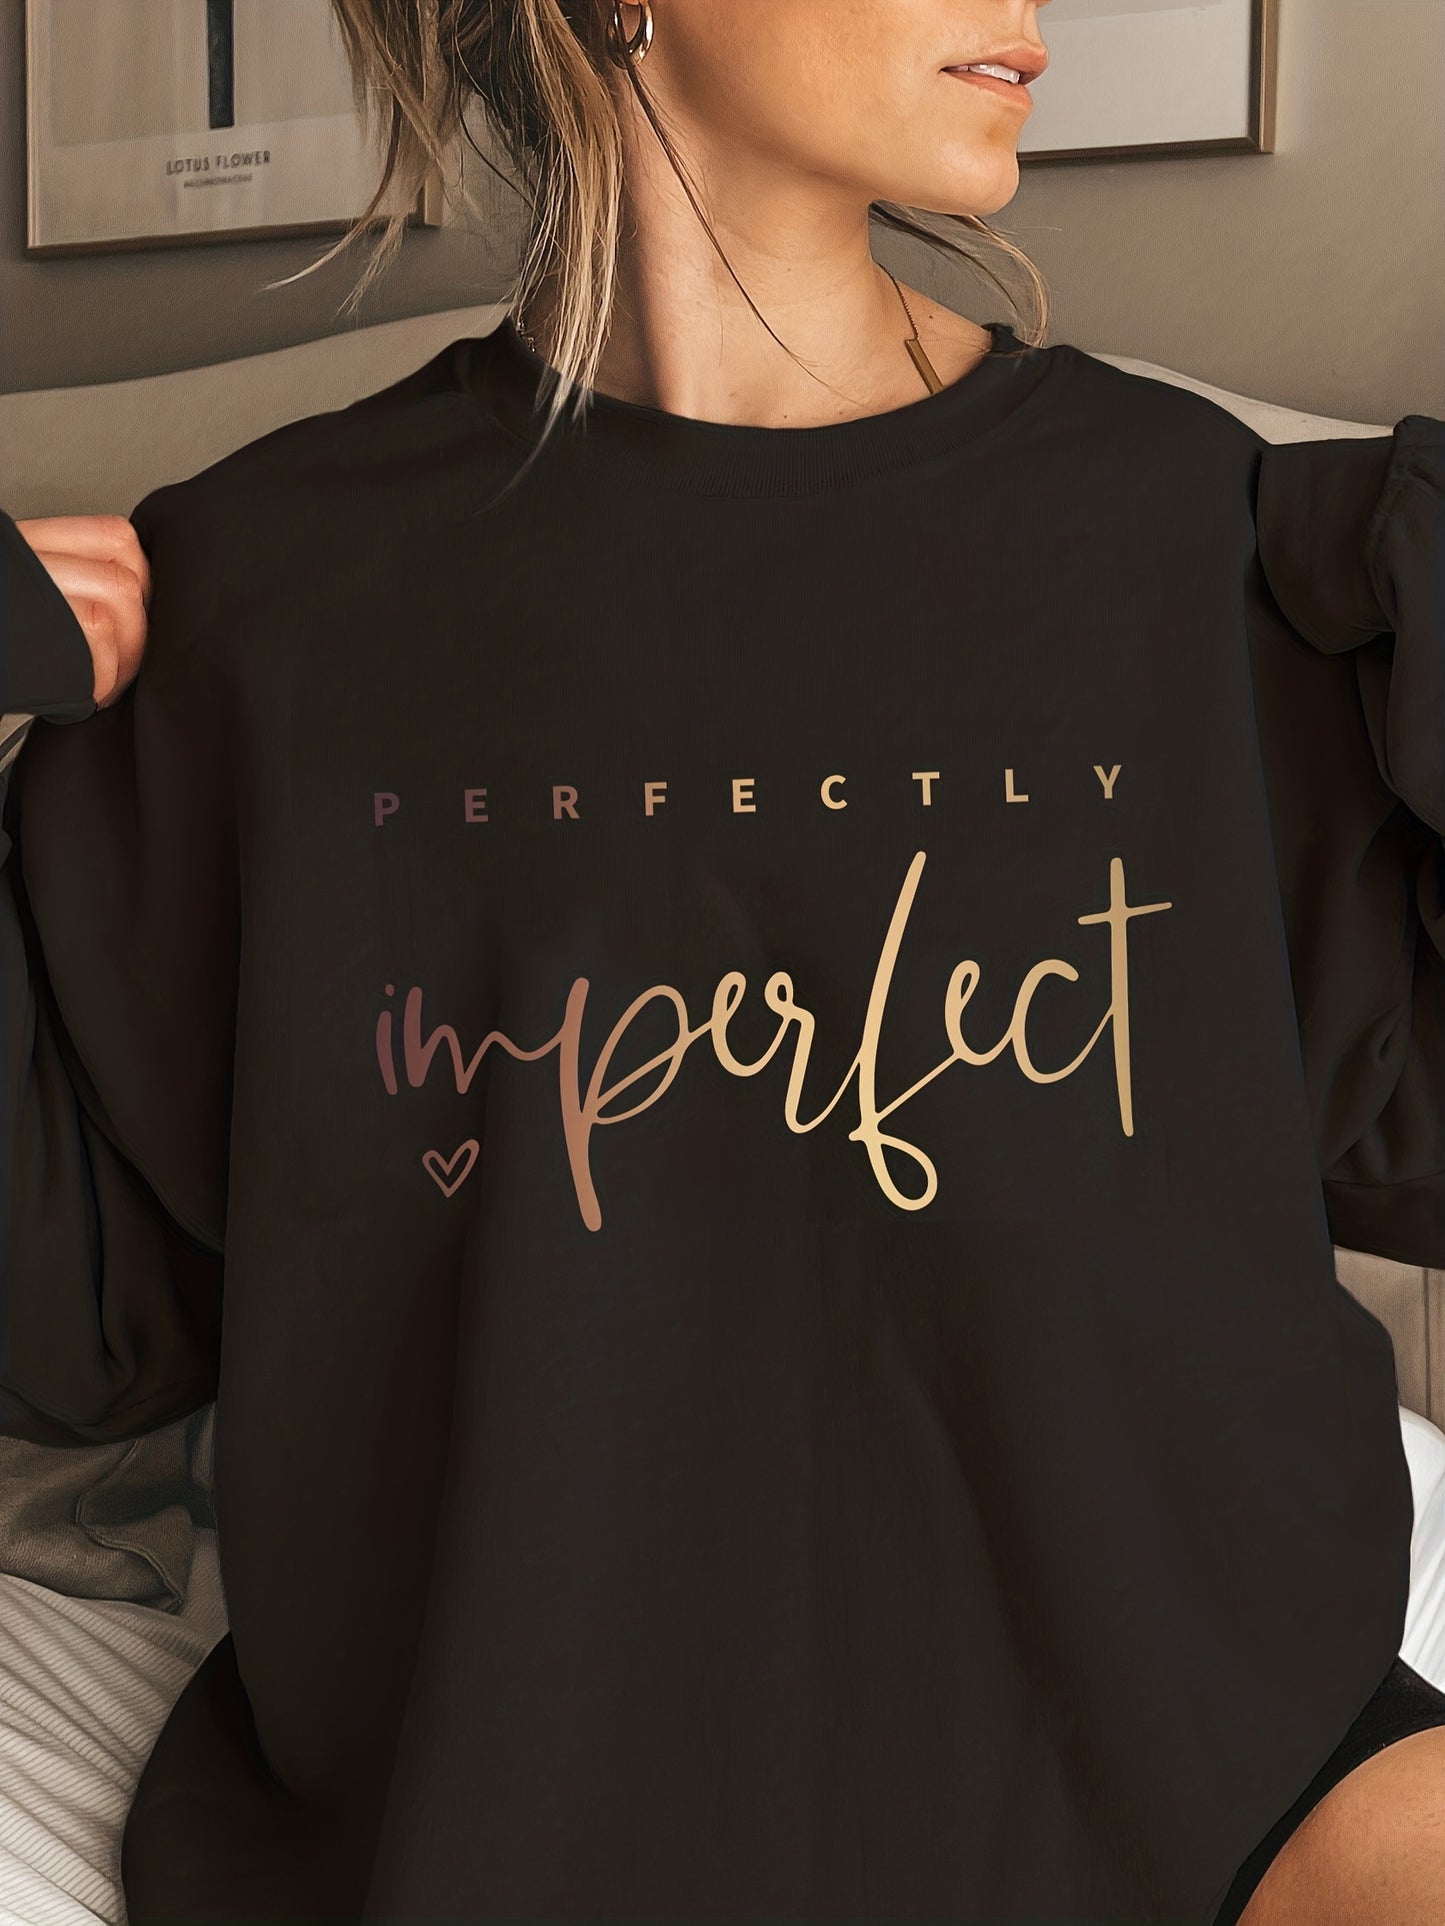 Perfectly Imperfect Women's Pullover Sweatshirt claimedbygoddesigns